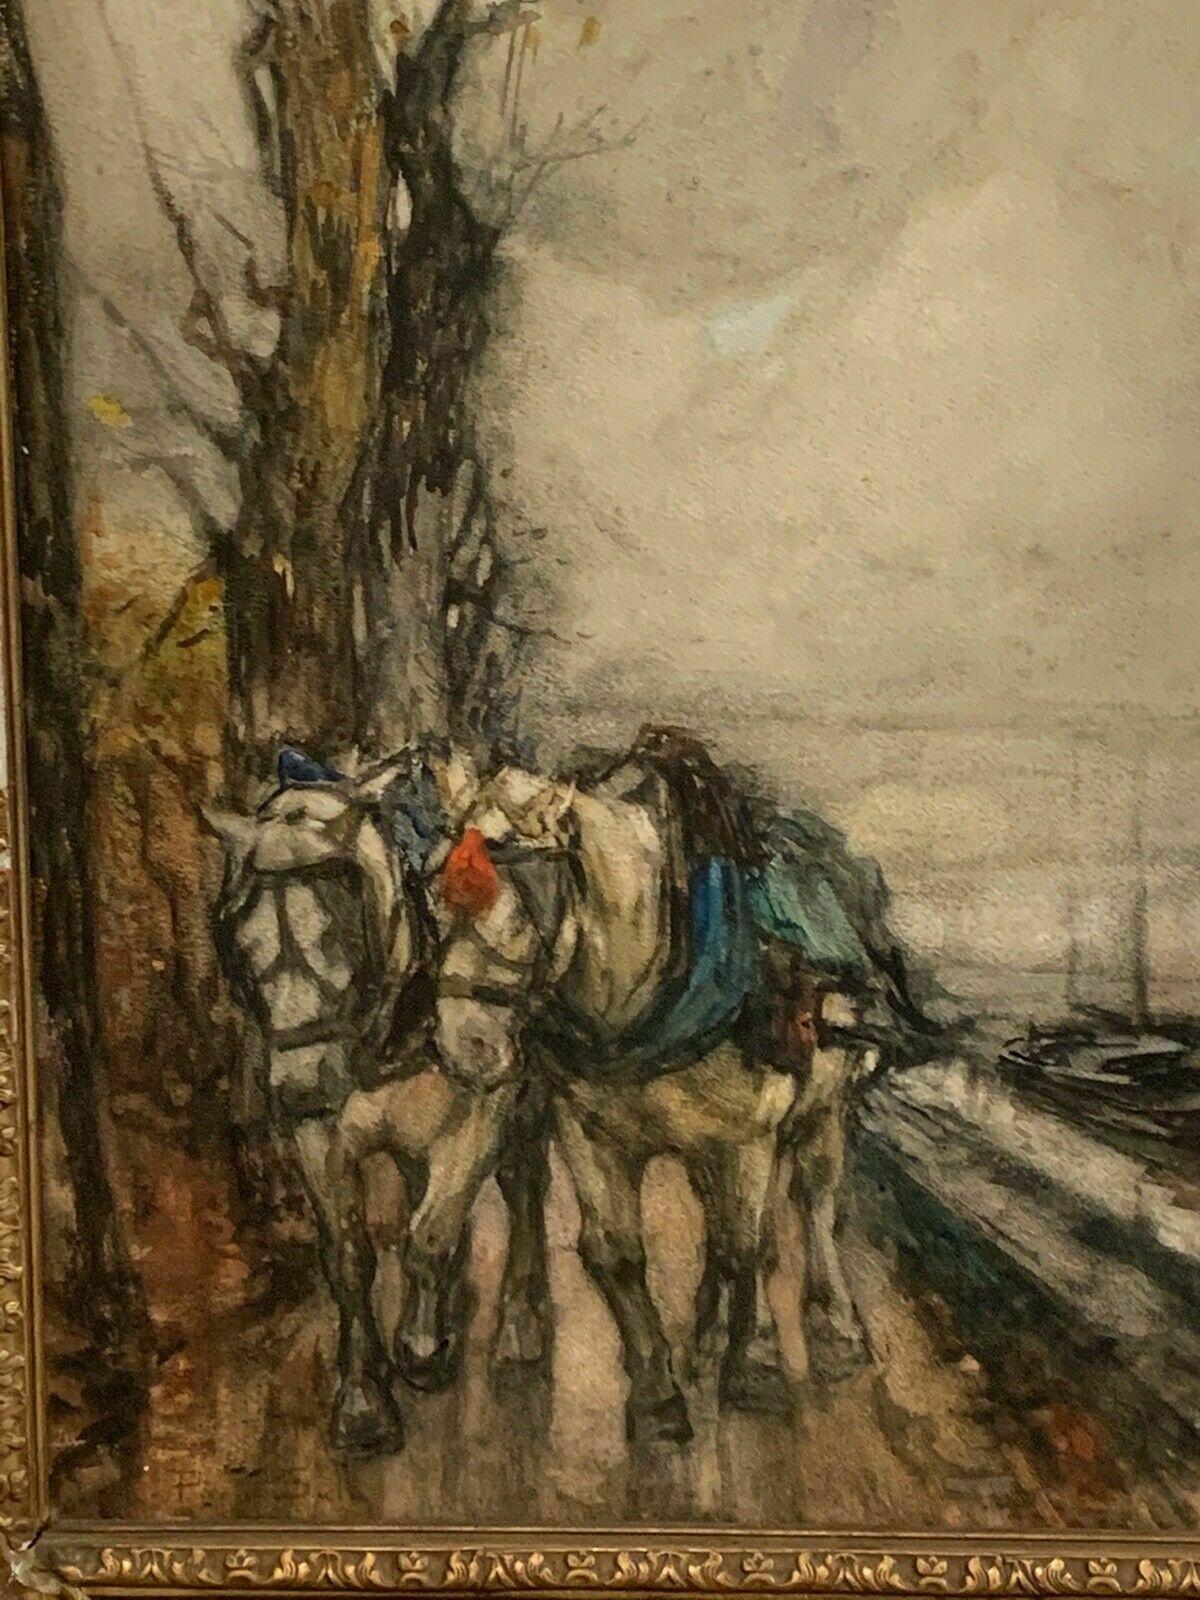 Painting executed in watercolor on cardboard, signed Paolo Sala (Milan, 1859 - 1929) on the lower left. The work depicts draft horses along the canals of Milan.
(55x76cm)
Paolo Sala (1859-1924) was an Italian painter who achieved national and